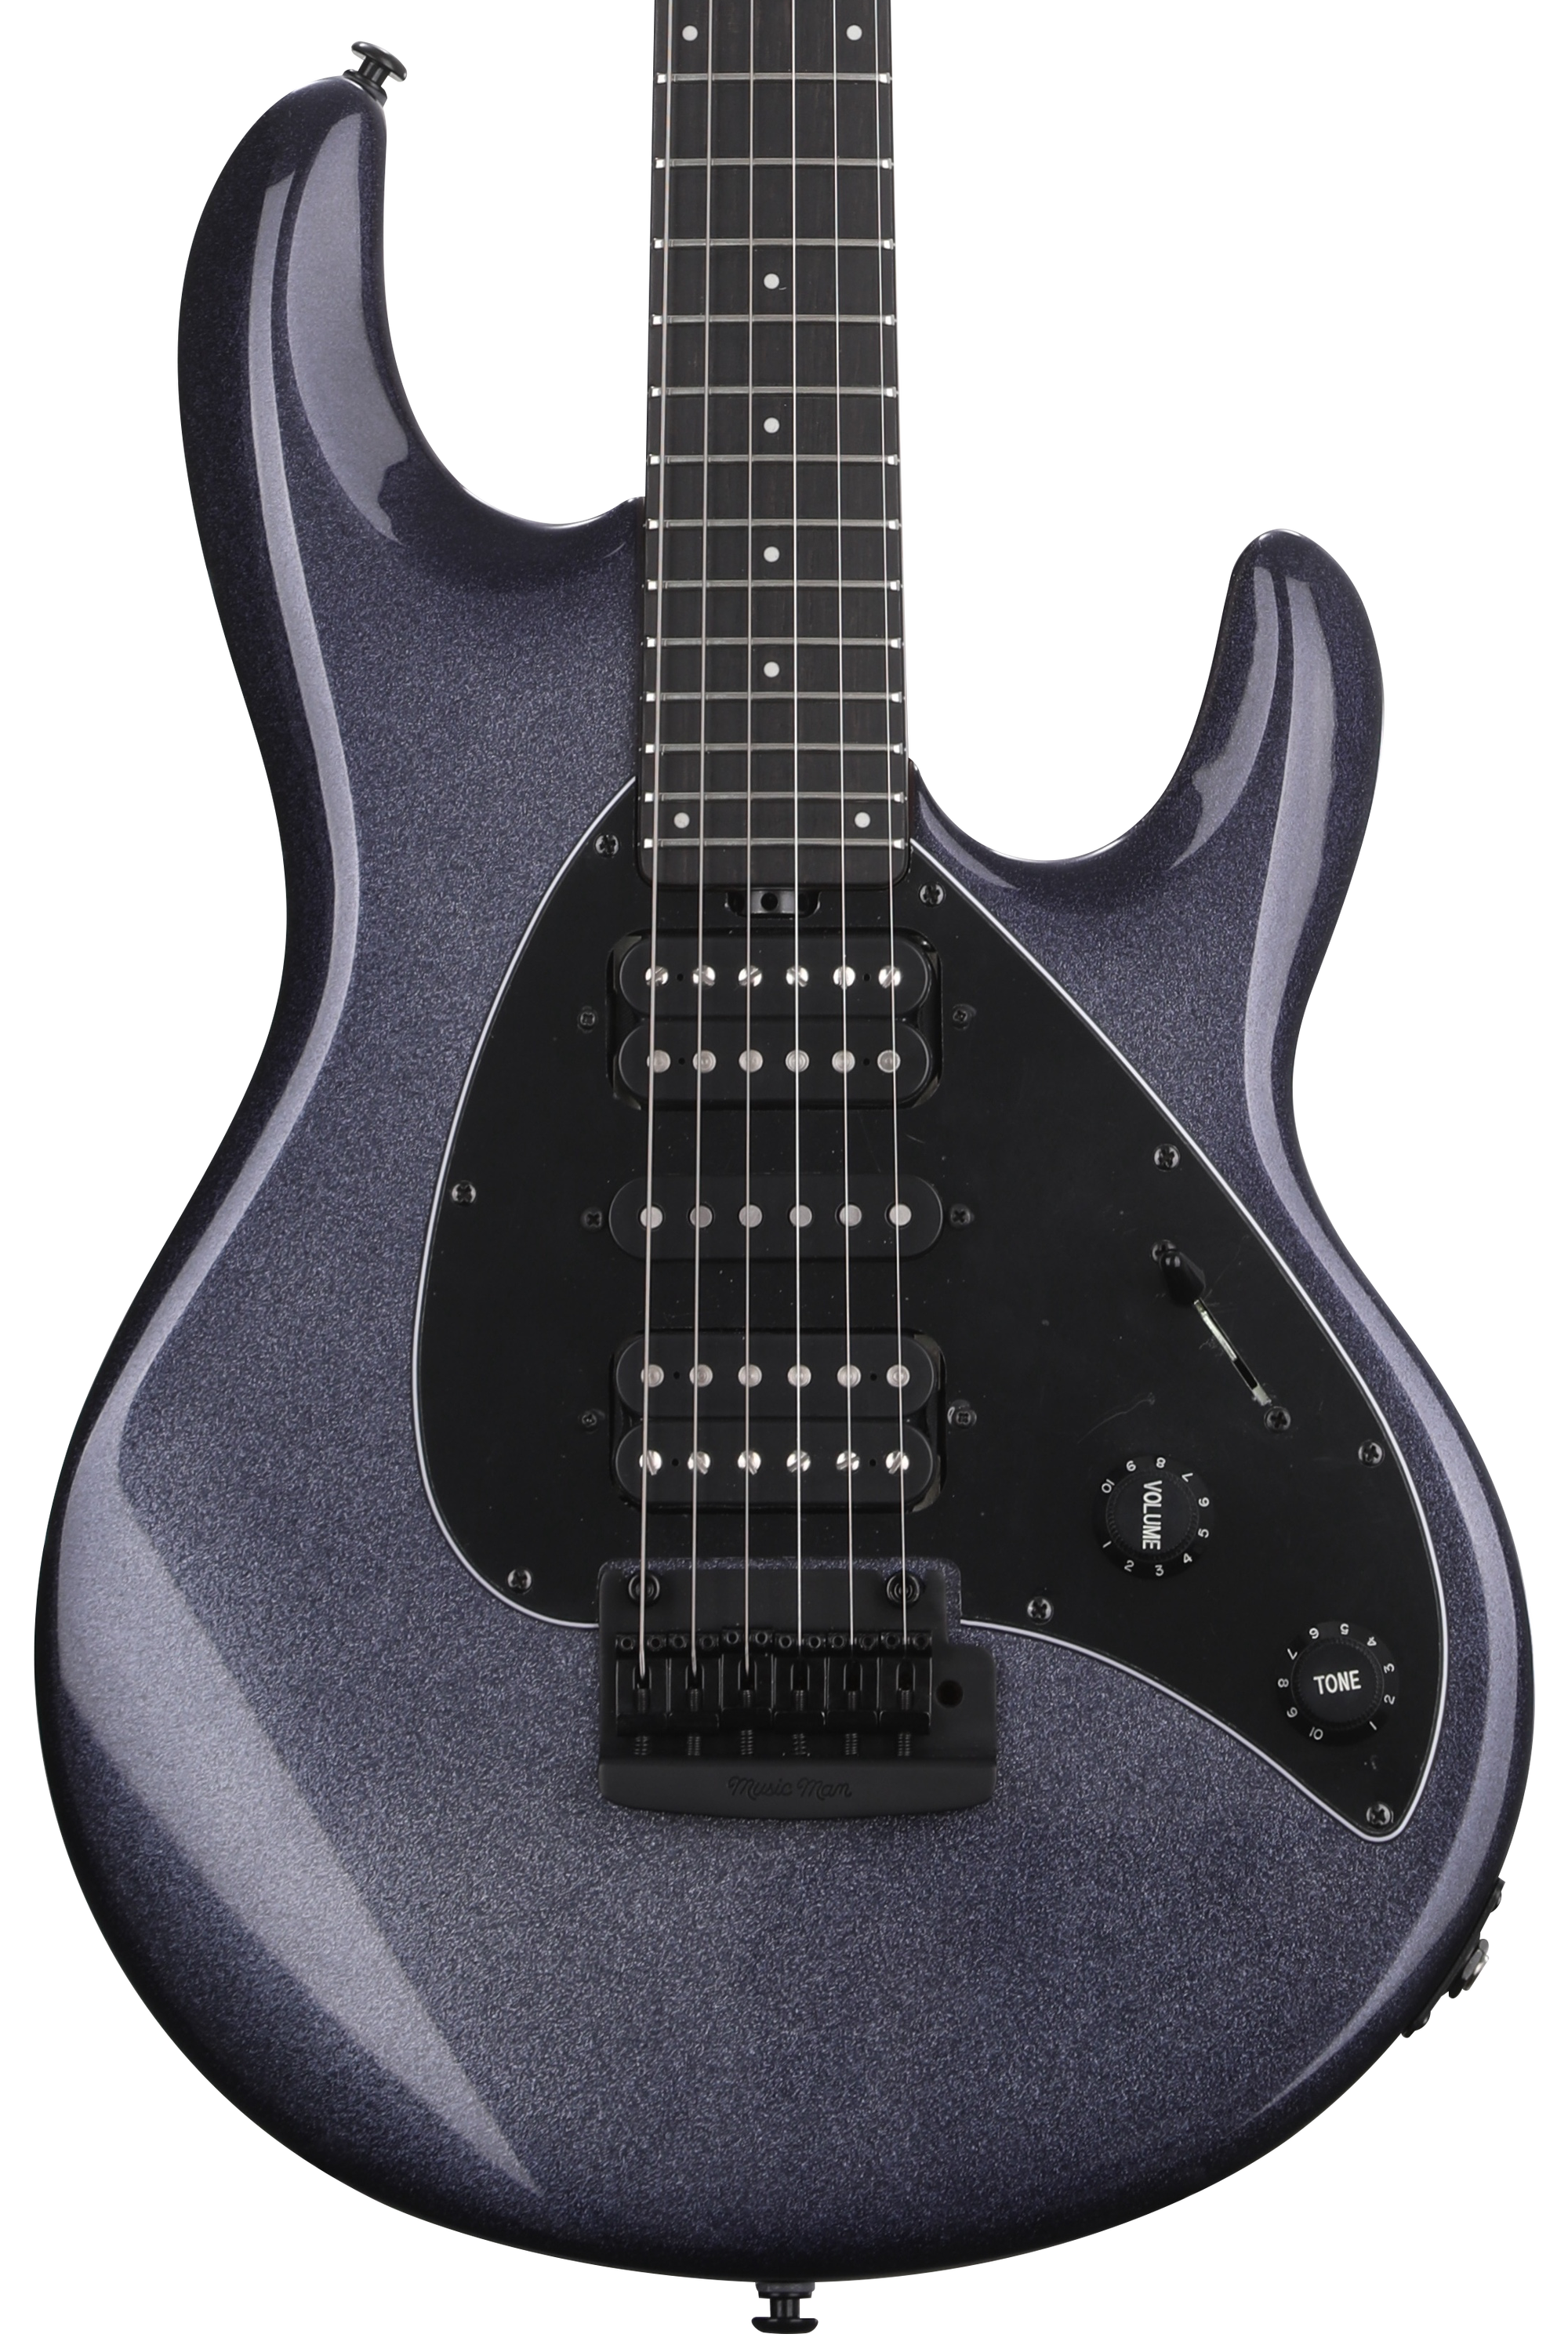 Ernie Ball Music Man Silhouette HSH Trem Electric Guitar - Eclipse Sparkle,  Sweetwater Exclusive